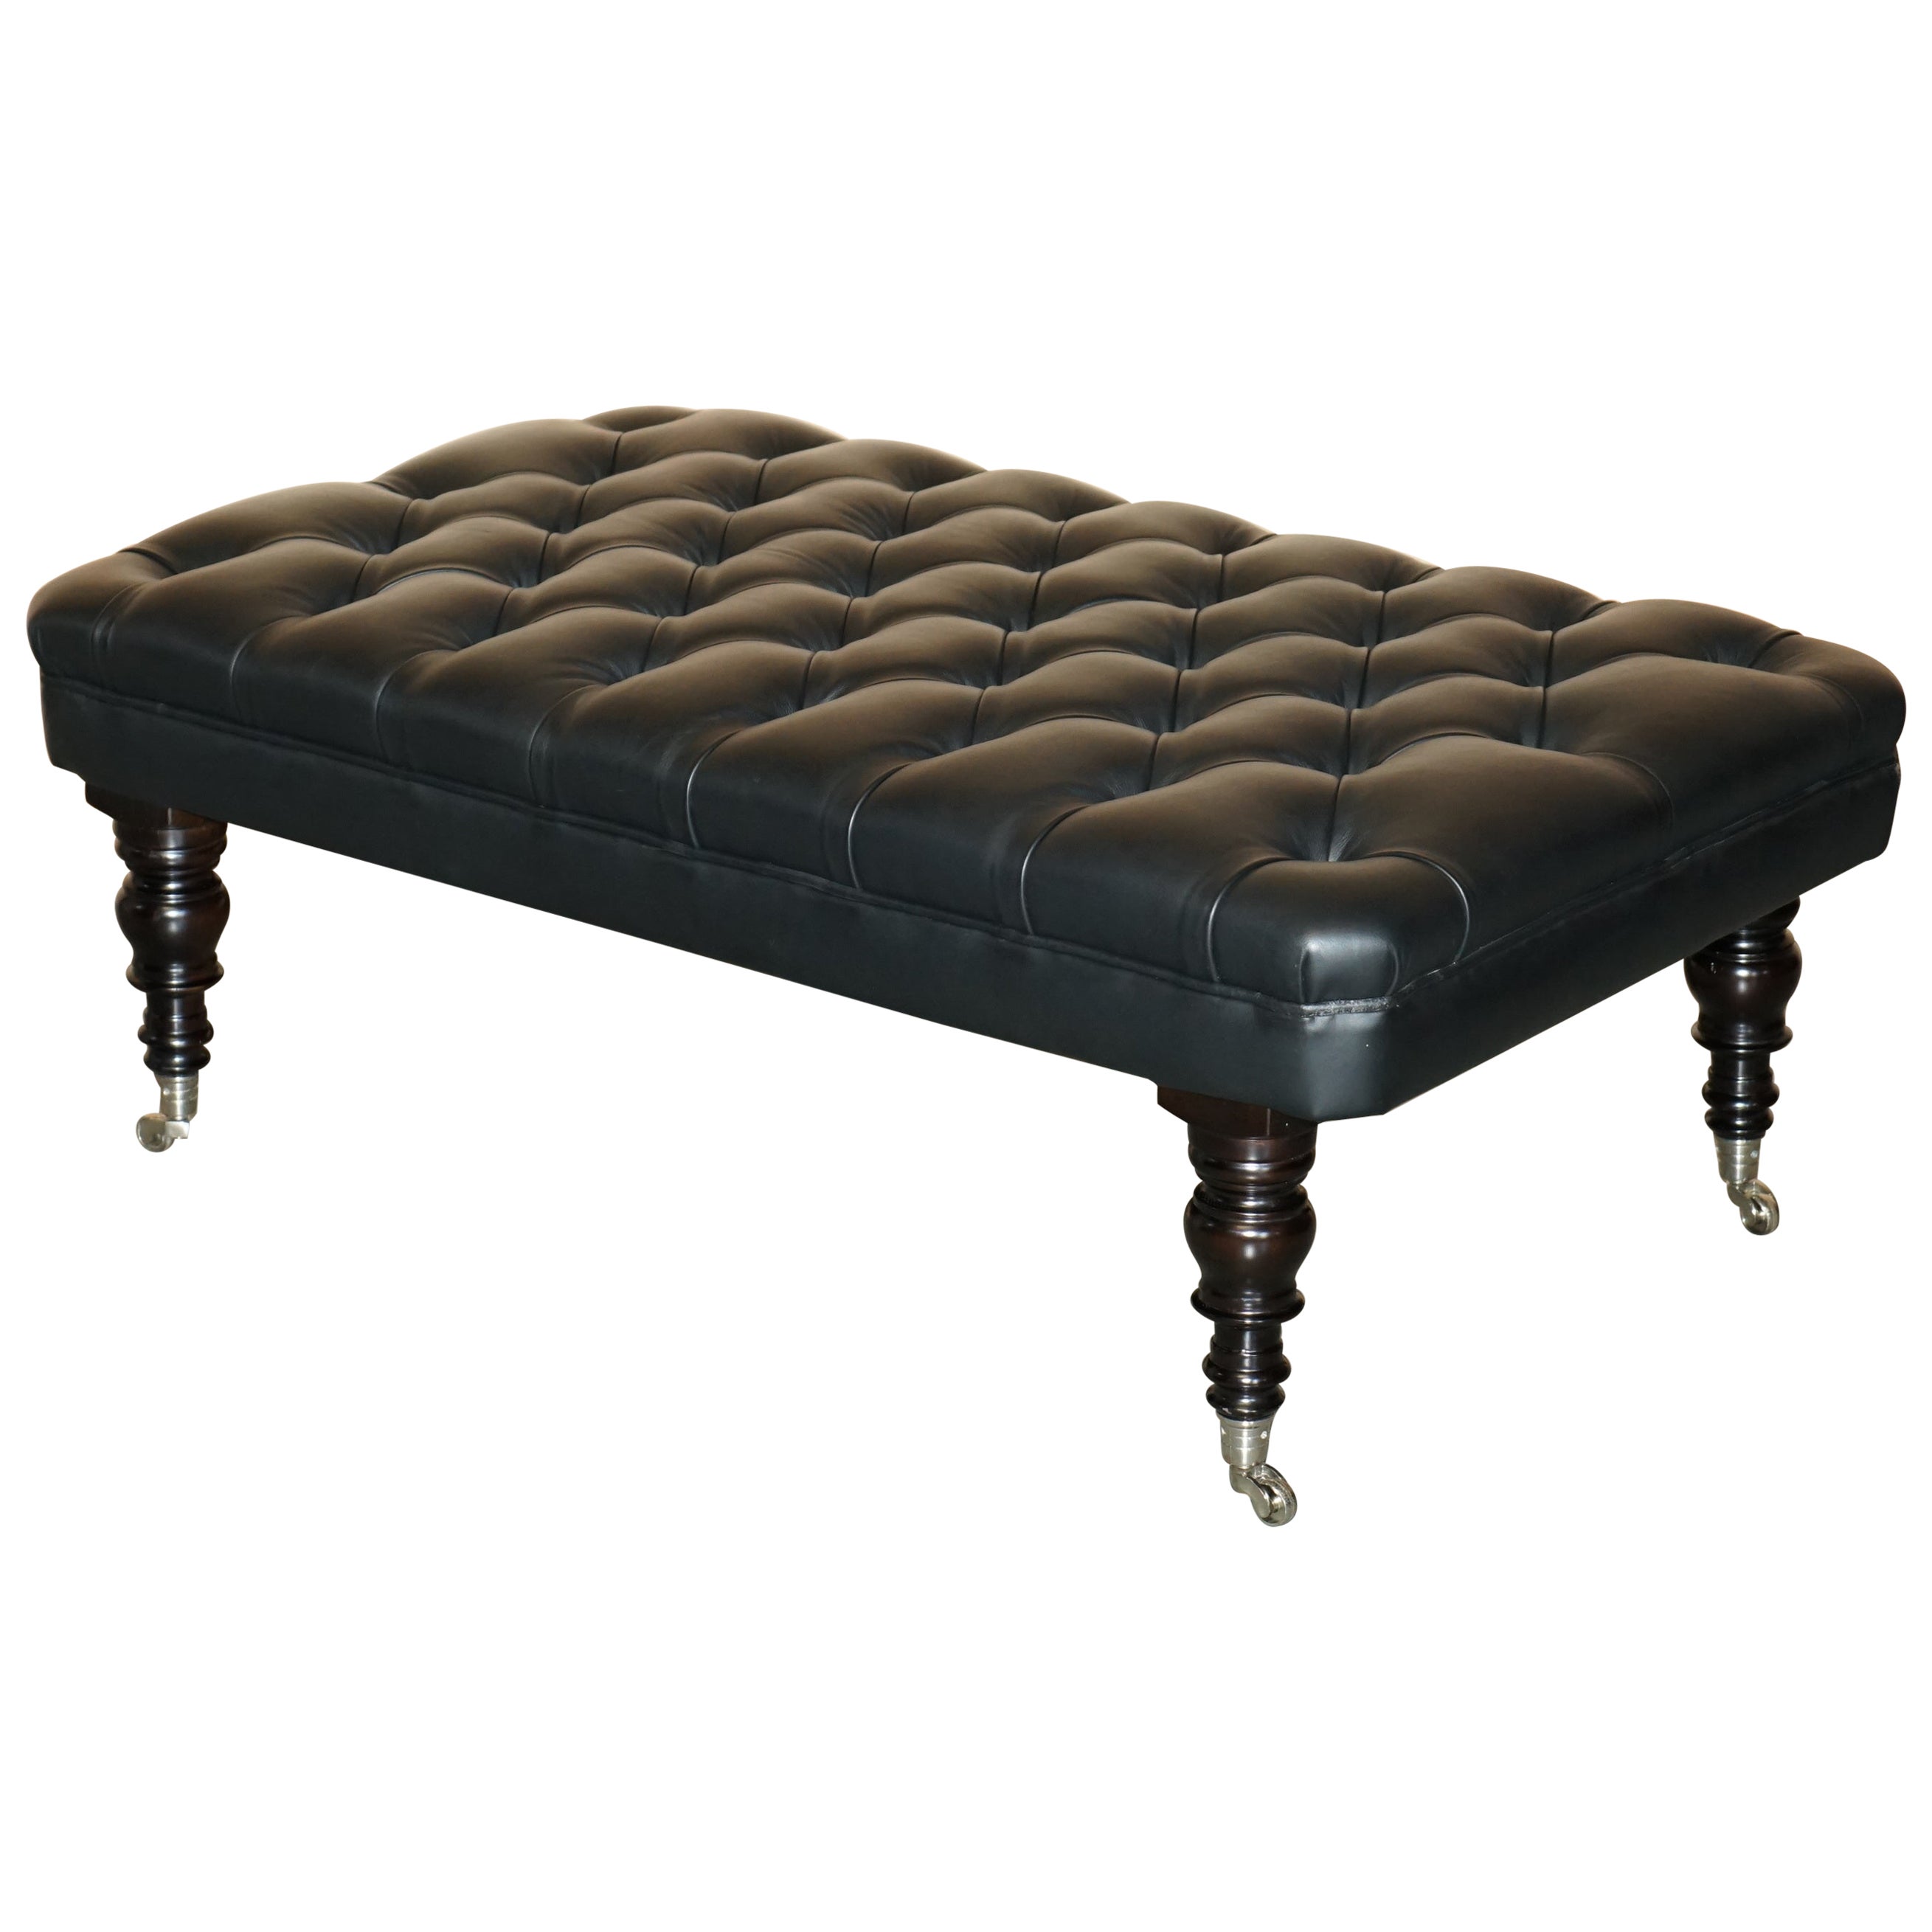 1 OF 2 GEORGE SMITH EXTRA LARGE CHESTERFiELD BLACK LEATHER TUFTED FOOTSTOOLS For Sale